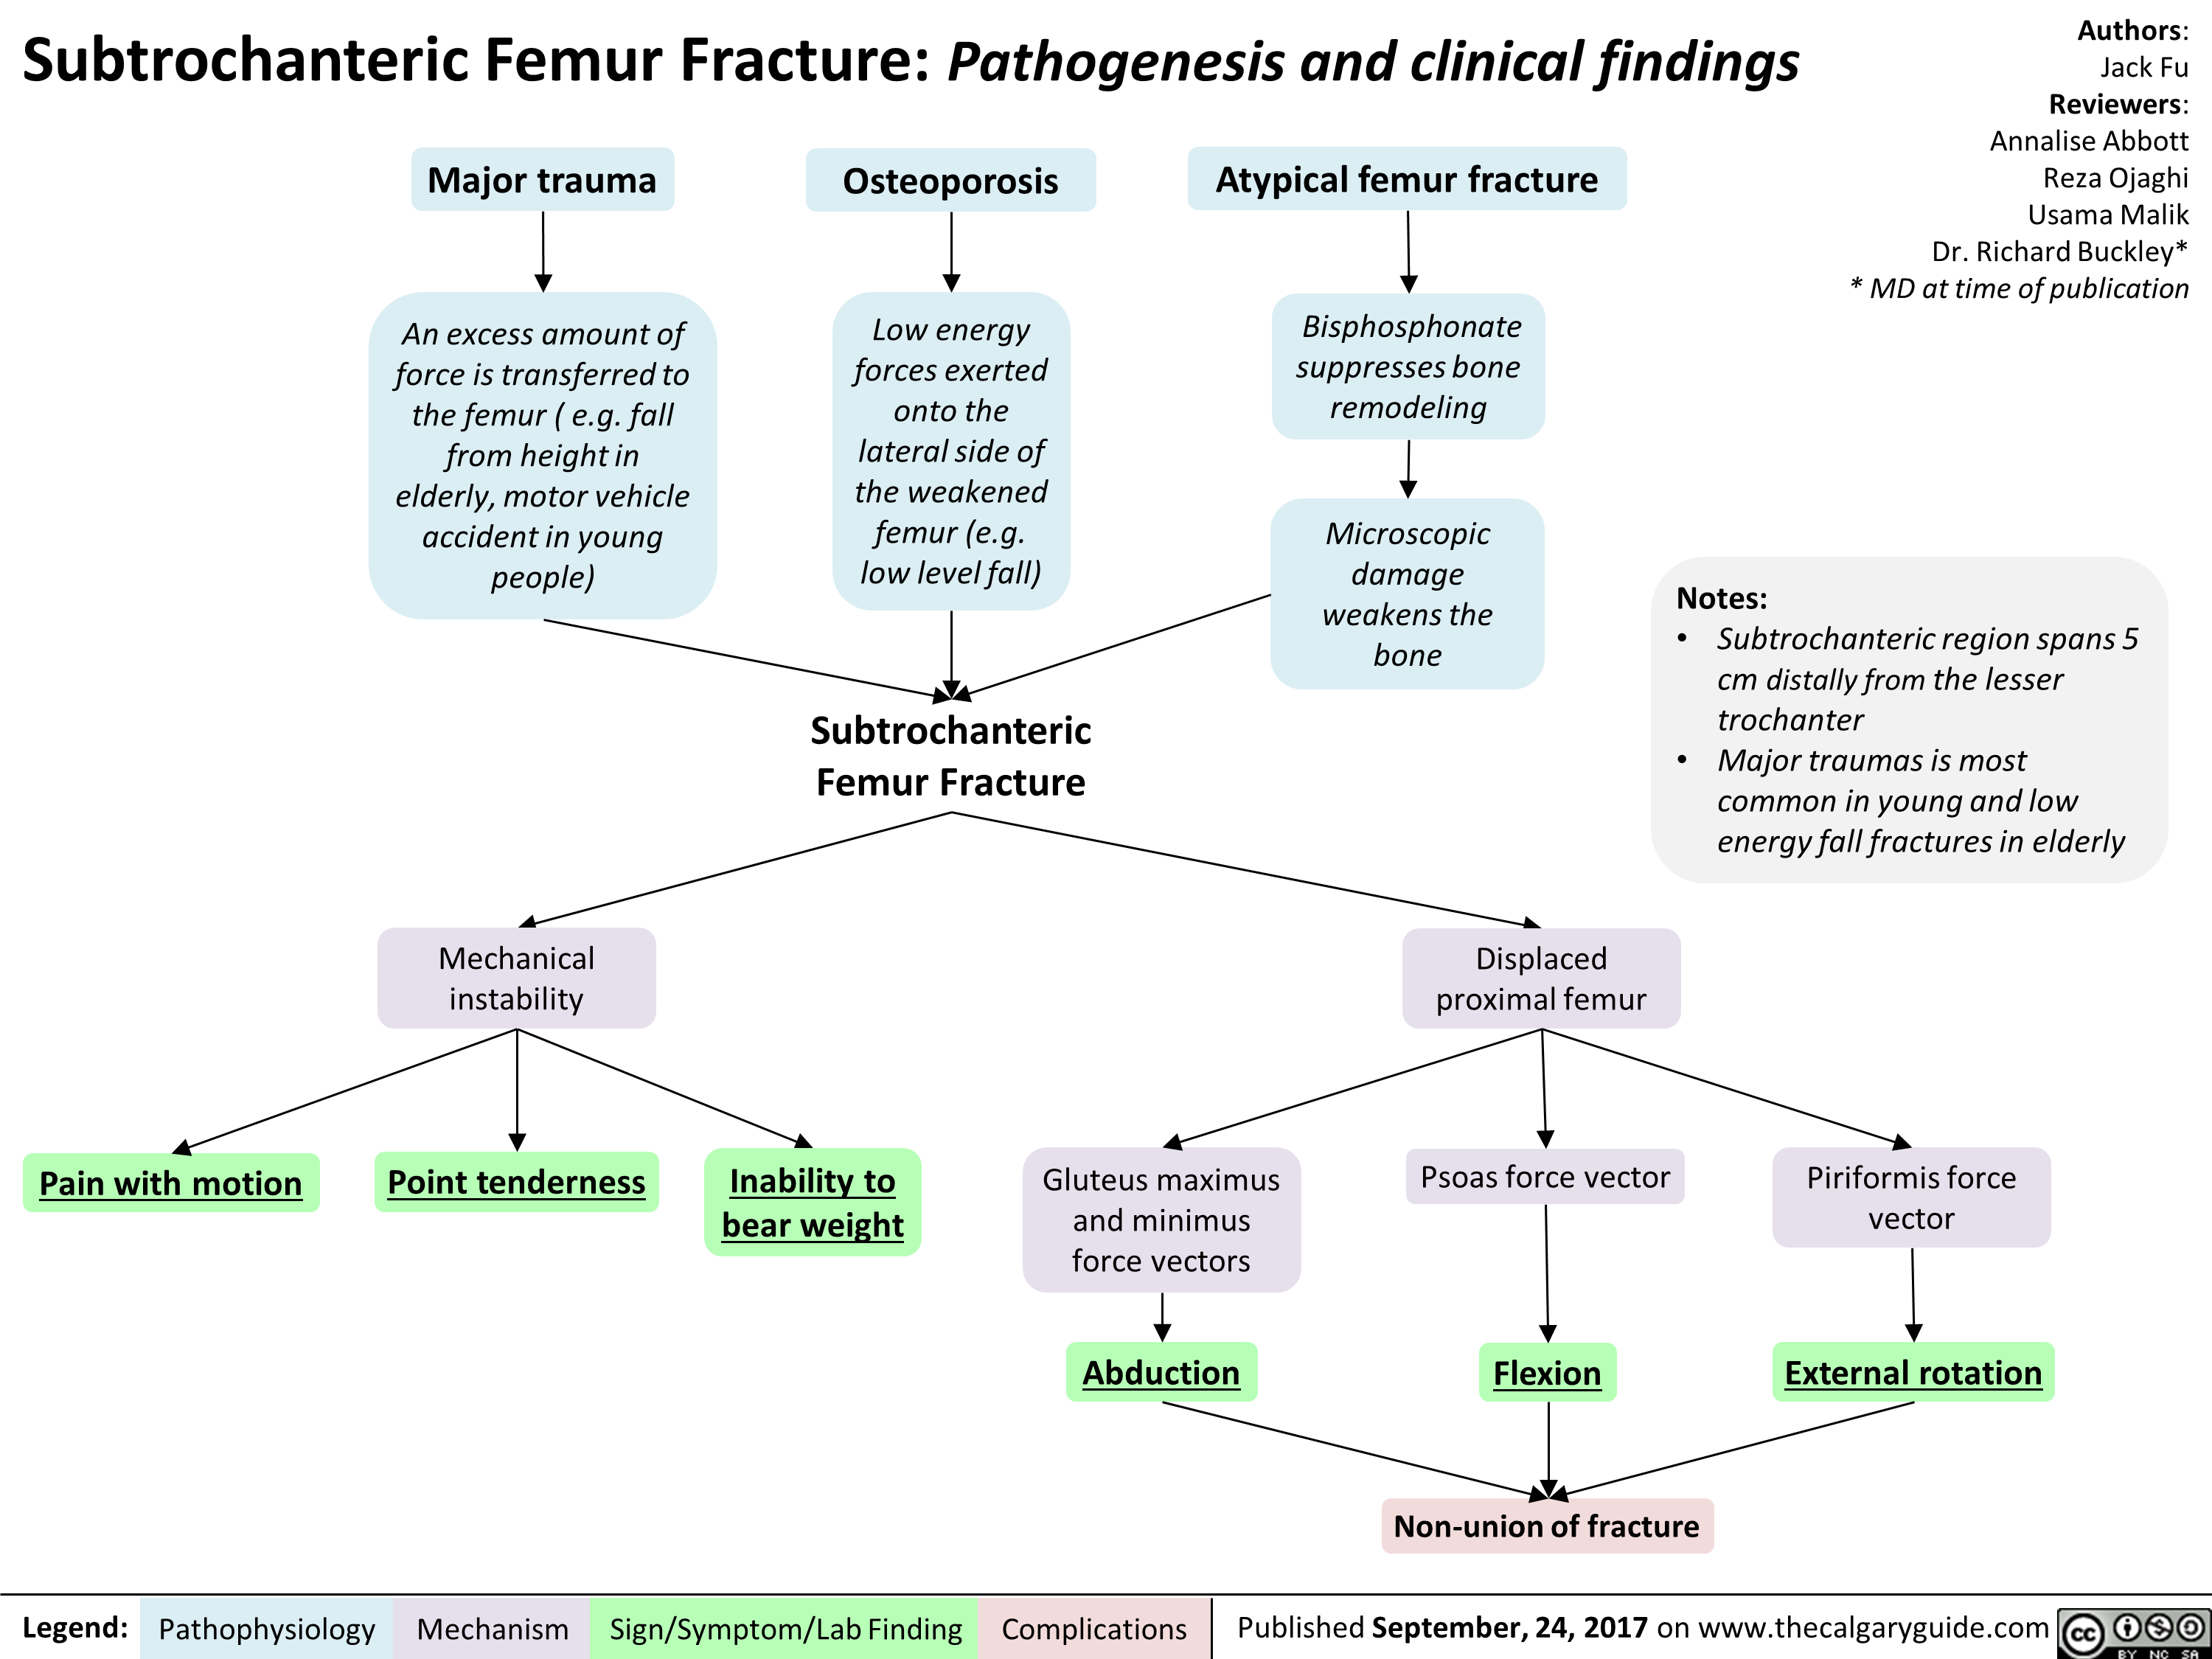 Subtrochanteric Femur Fracture: Pathogenesis and clinical inical findings lack Yu gm: Annalise Alaboo Major trauma s Osteo l: porosis Atypical femur fracture si: Reza Ojaghi '1,Usama Malik Dr. Richard Buckley. • moottime of publication An excess amount of Low energy Bisphosphonate force is transferred to forces exerted suppresses bone the femur( e.g. fall onto the remodeling from height in lateral side of elderly, motor vehicle the weakened ii accident in young fem.-Lb..Microscopic pm*/ low level foll) damage Notes: weakens the ------------___________L_____---------- hone • Subtrochanteric region span, cm .tally from the lesser Subtrochanteric trochorder • Major haumas is most Femur Fracture common in young and low energy fall fractures in elderly 
Mechanical instability 
Pain with motion Point tenderness Inability to  beercei ht 
Gluseus maxlmus and minimus force vectors Abduction  
Displaced 
proximal femur 
Psoas force vector Pirifo o 

Non-union of fracture 
External rotation 
Legend: Pa.ophysiolo. Mechanism sign/Symptom/Lab Finding Complications 
Published September, Mk 201, on envie thecelgeigguide CO. rum 
